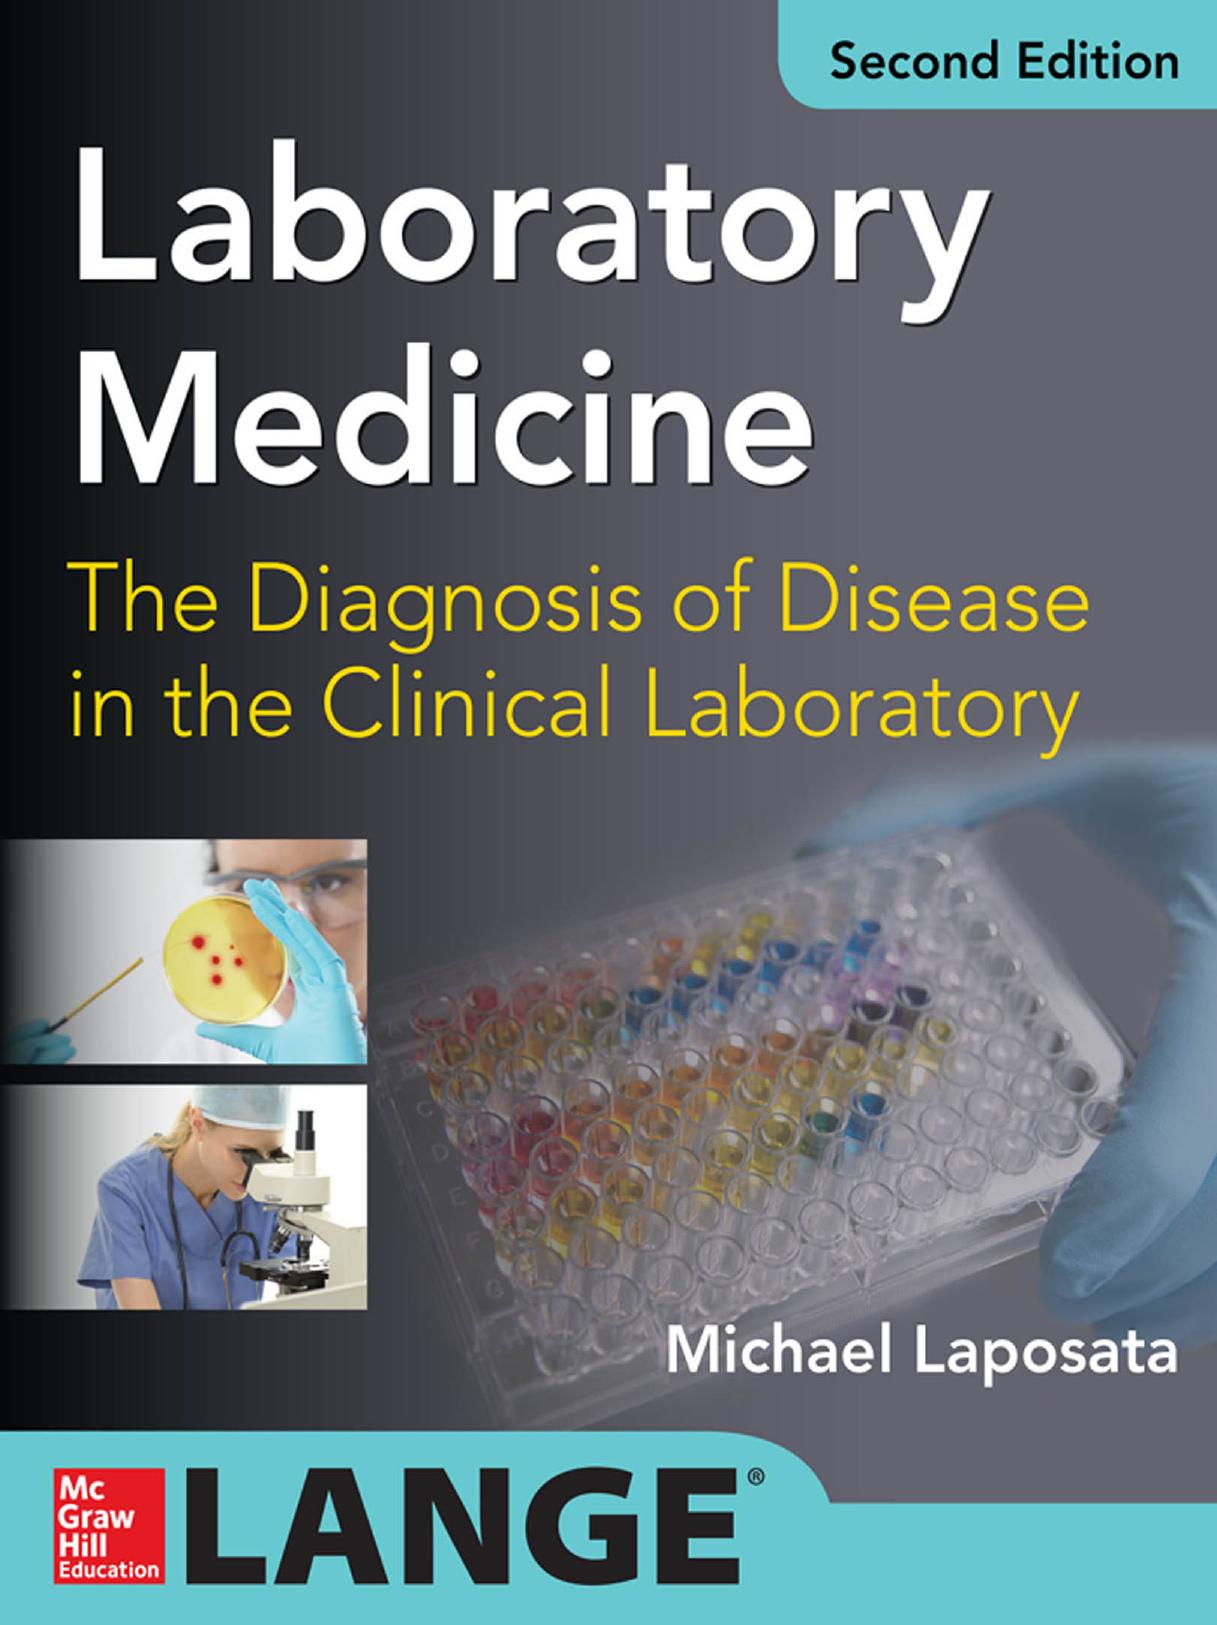 Laboratory Medicine: The Diagnosis of Disease in the Clinical Laboratory: Second Edition